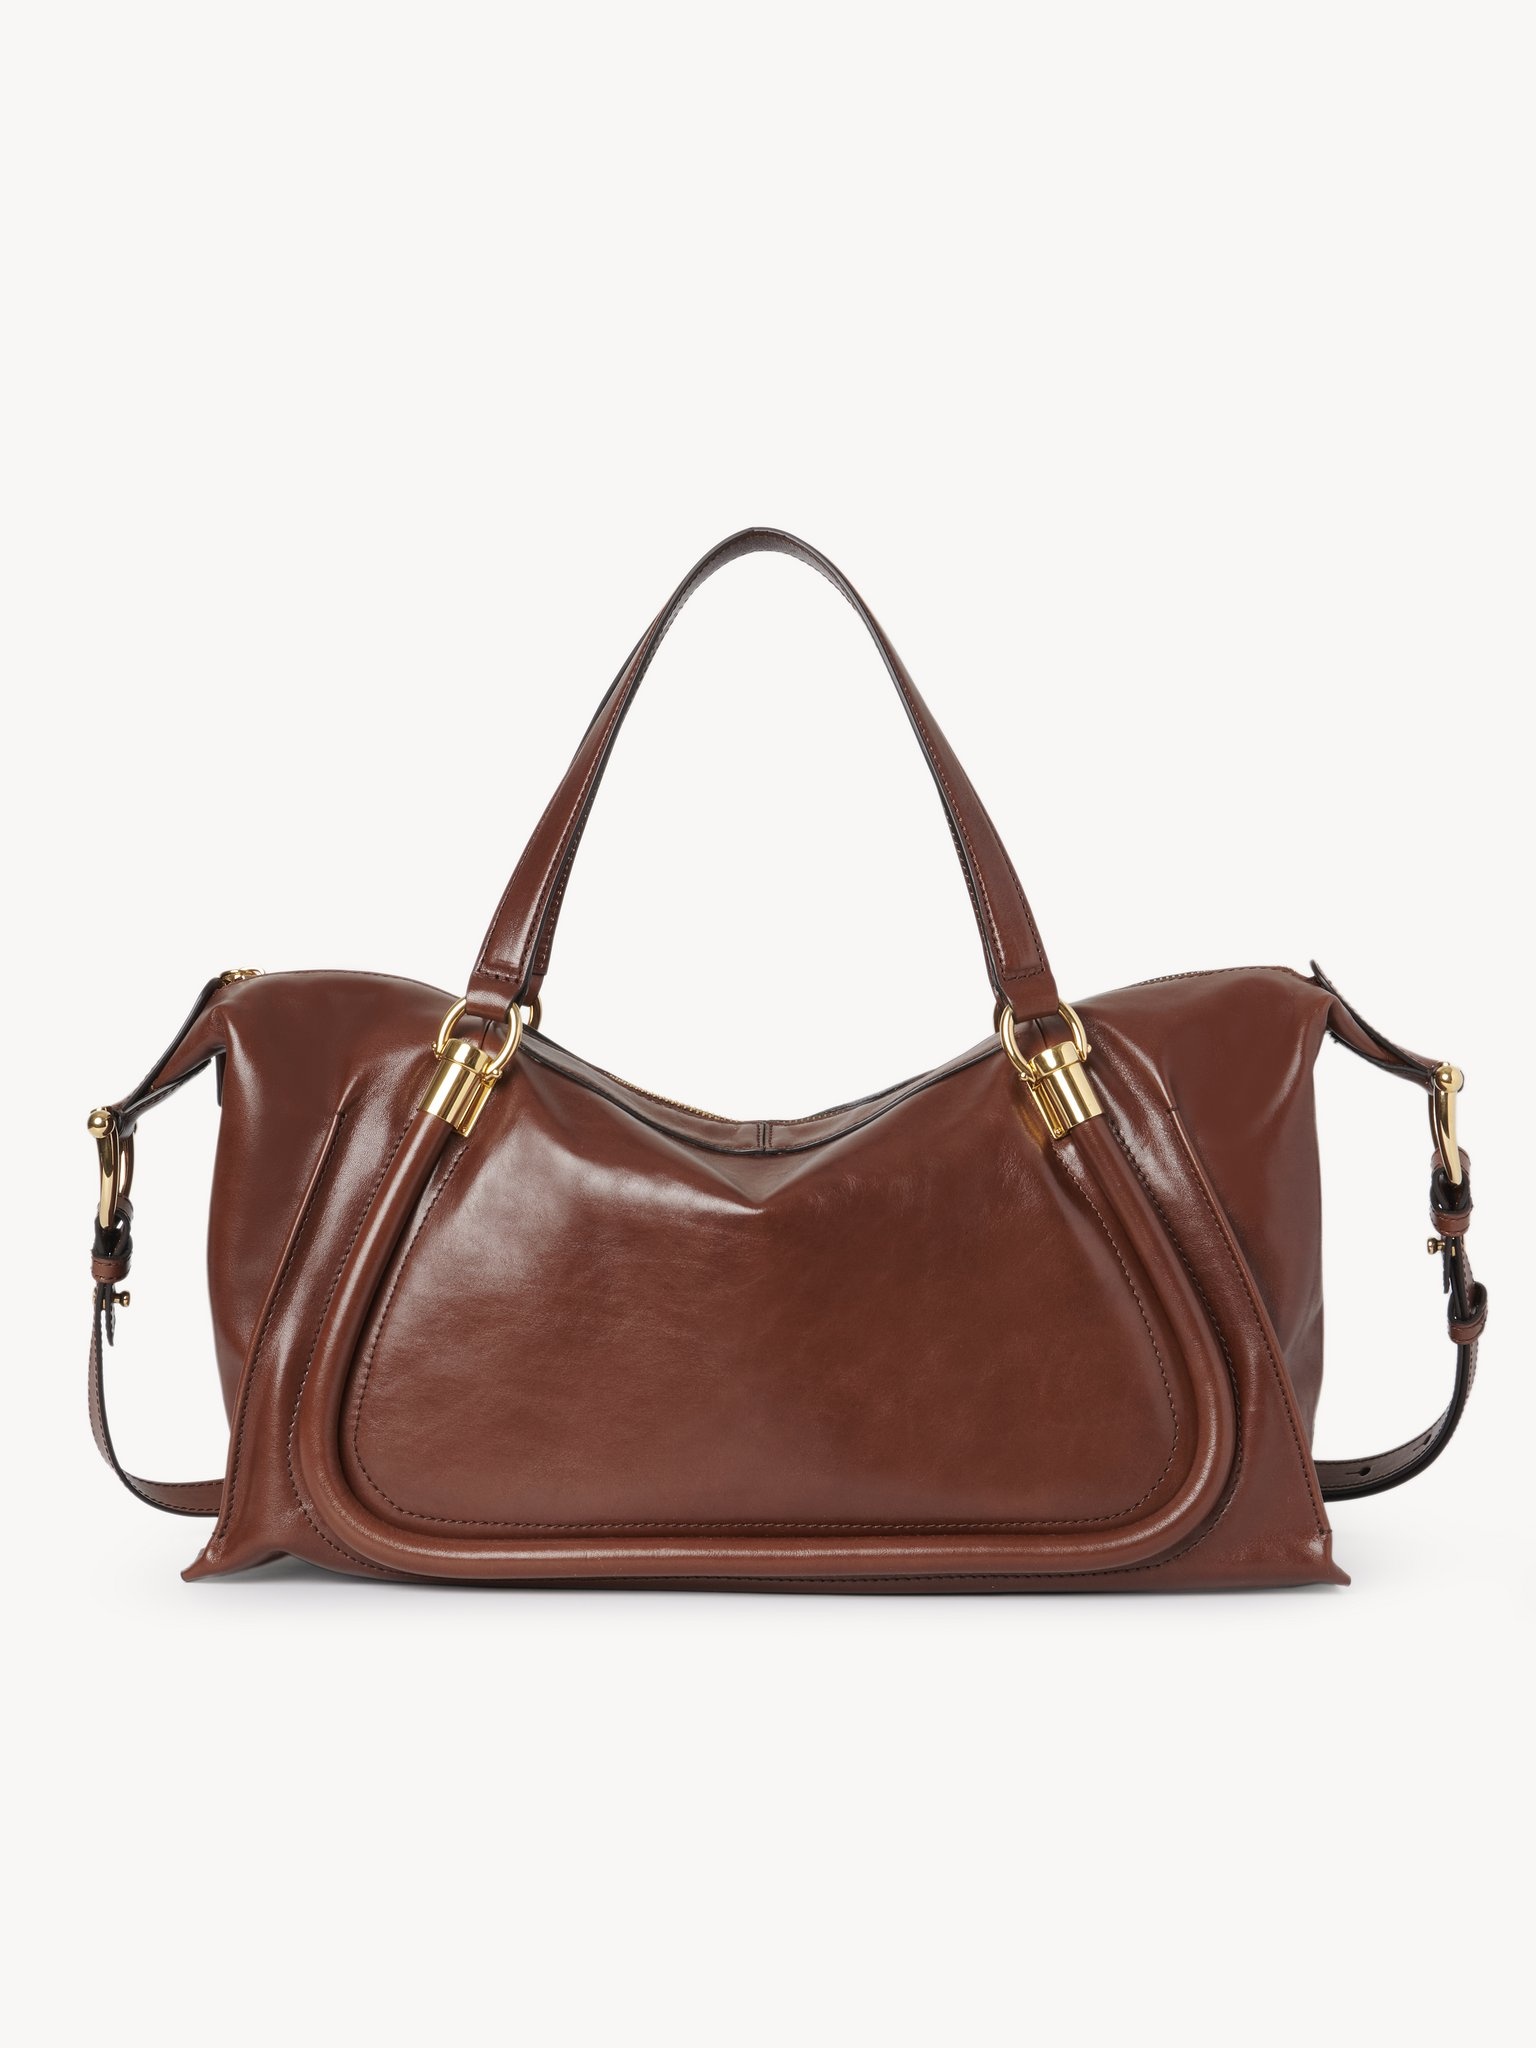 PARATY 24 BAG IN SOFT LEATHER - 5